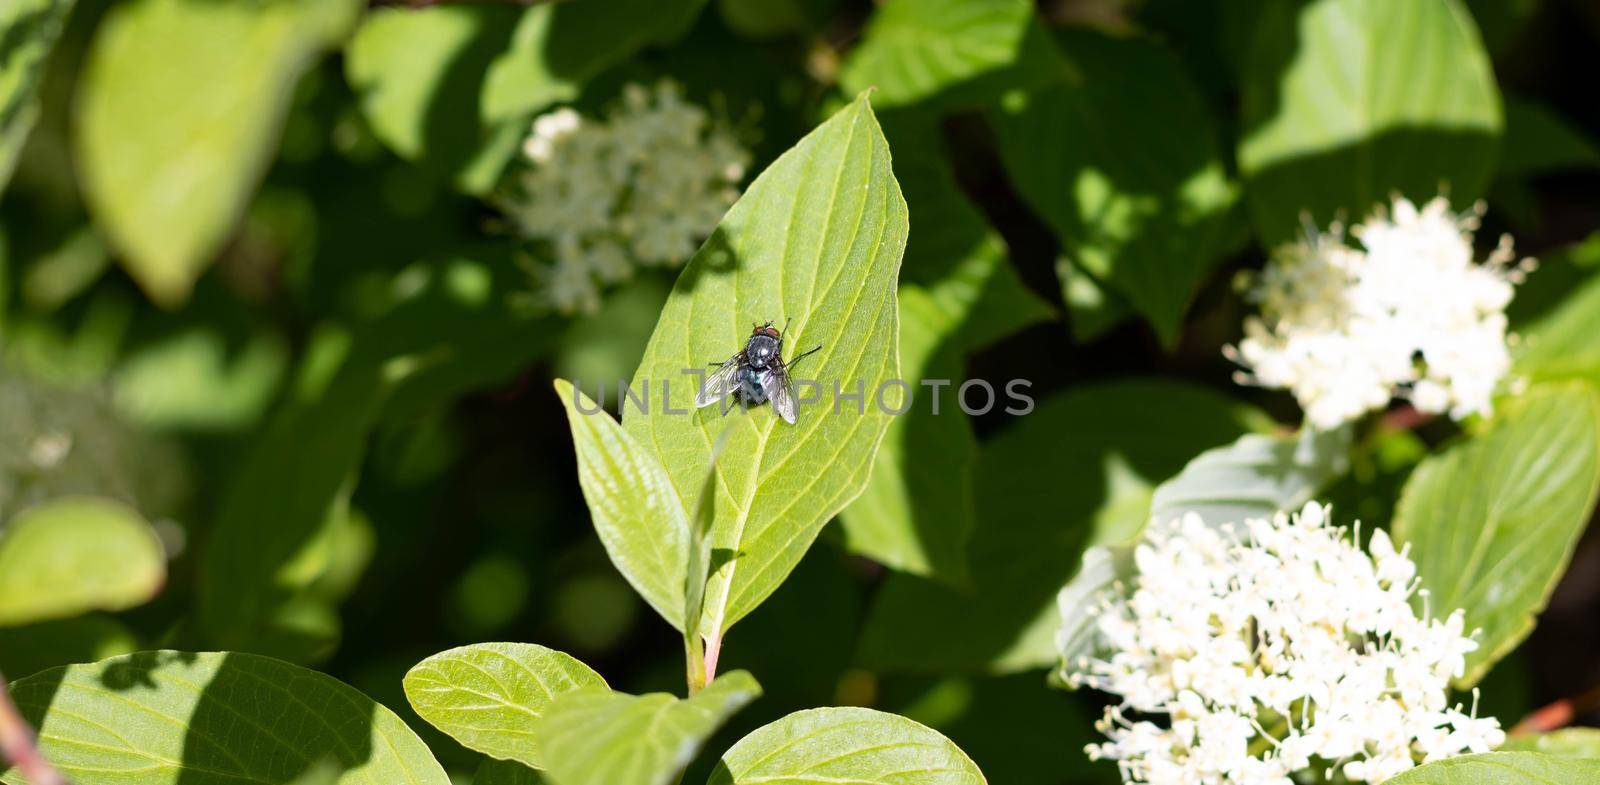 An ordinary blue fly sits on a green leaf close-up.